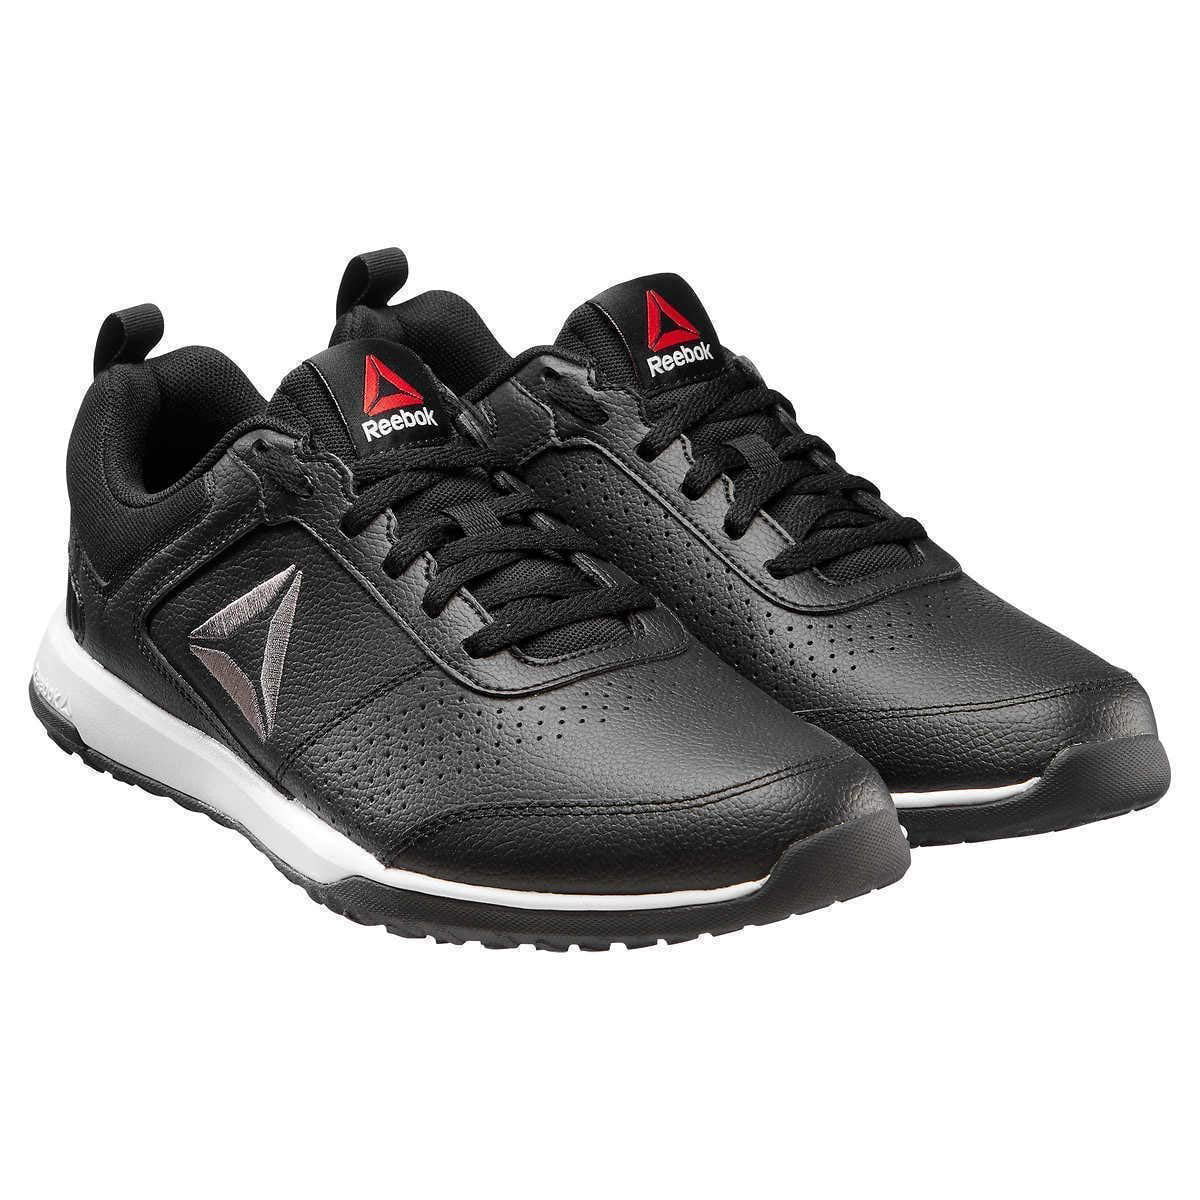 Reebok Mens CXT Athletic Shoes Leather 